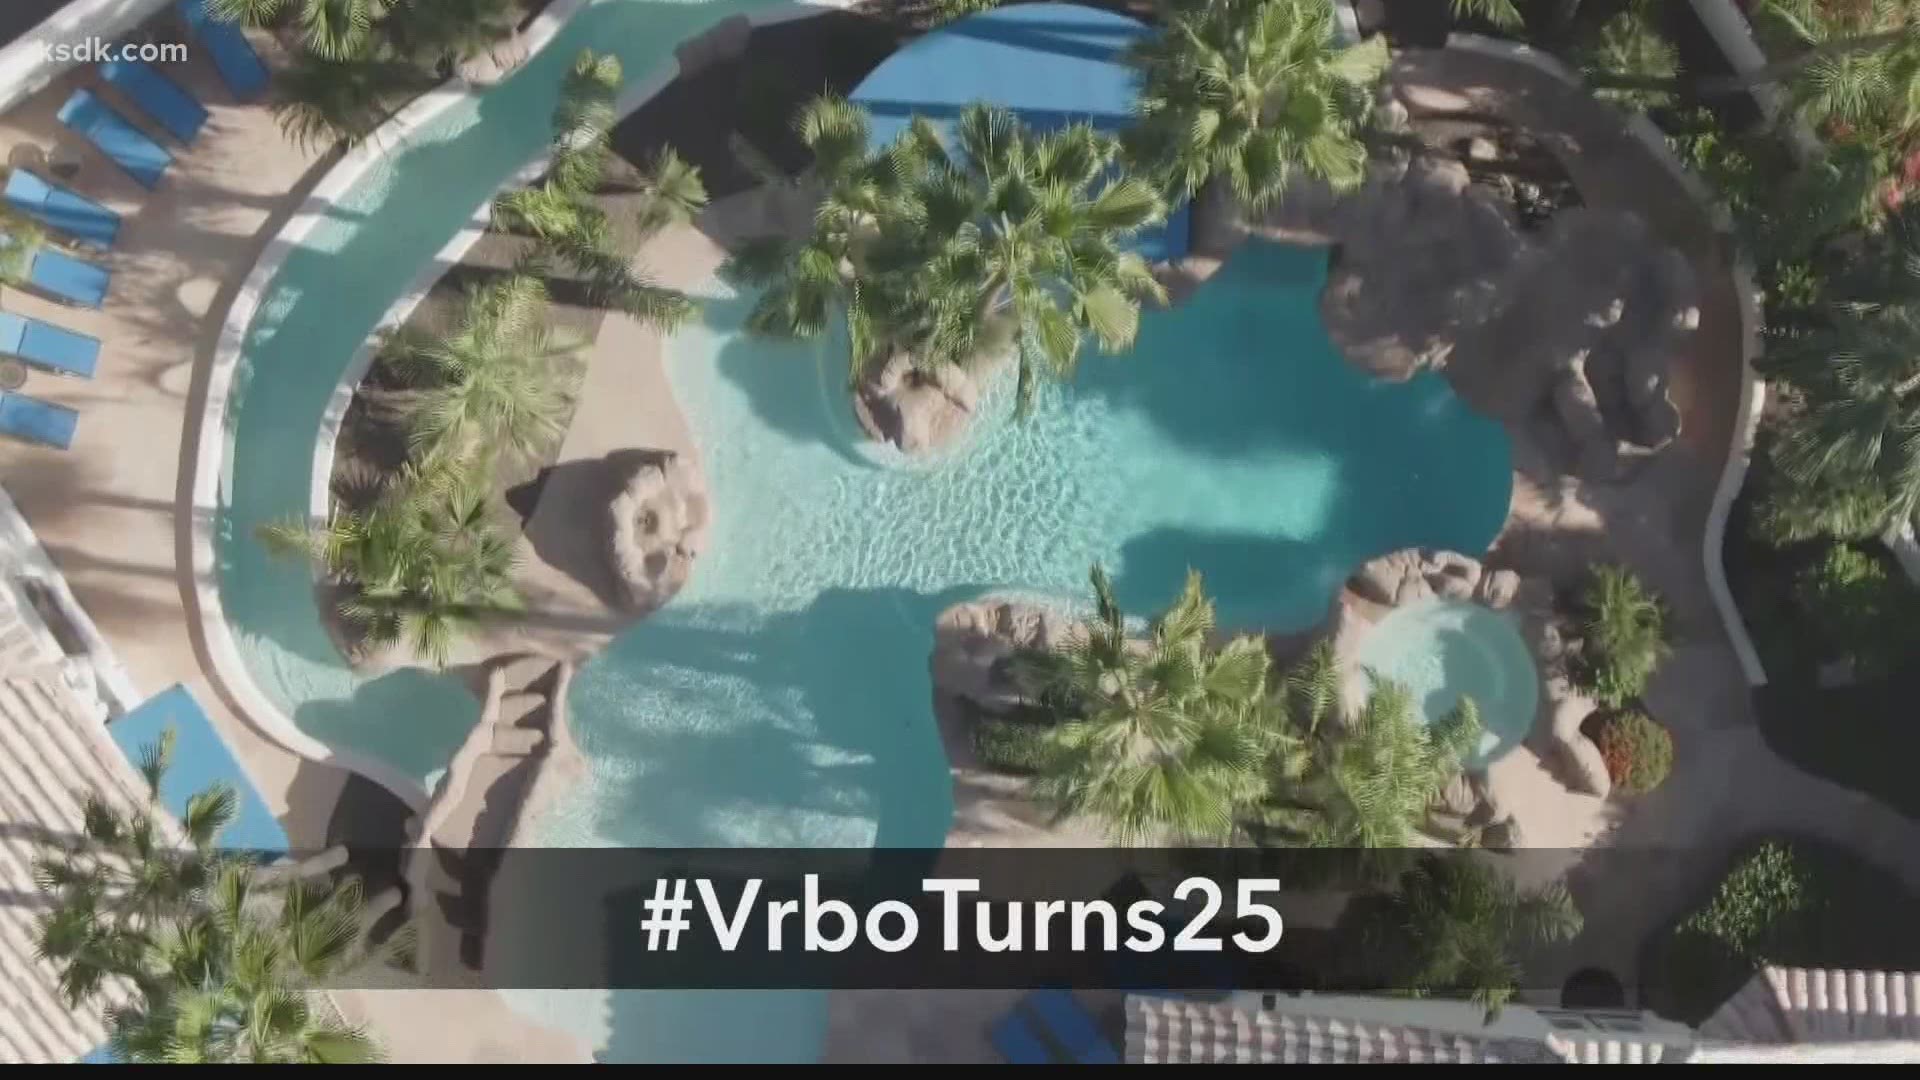 Find out how Vrbo has changed over the years to help families make memories on vacation.